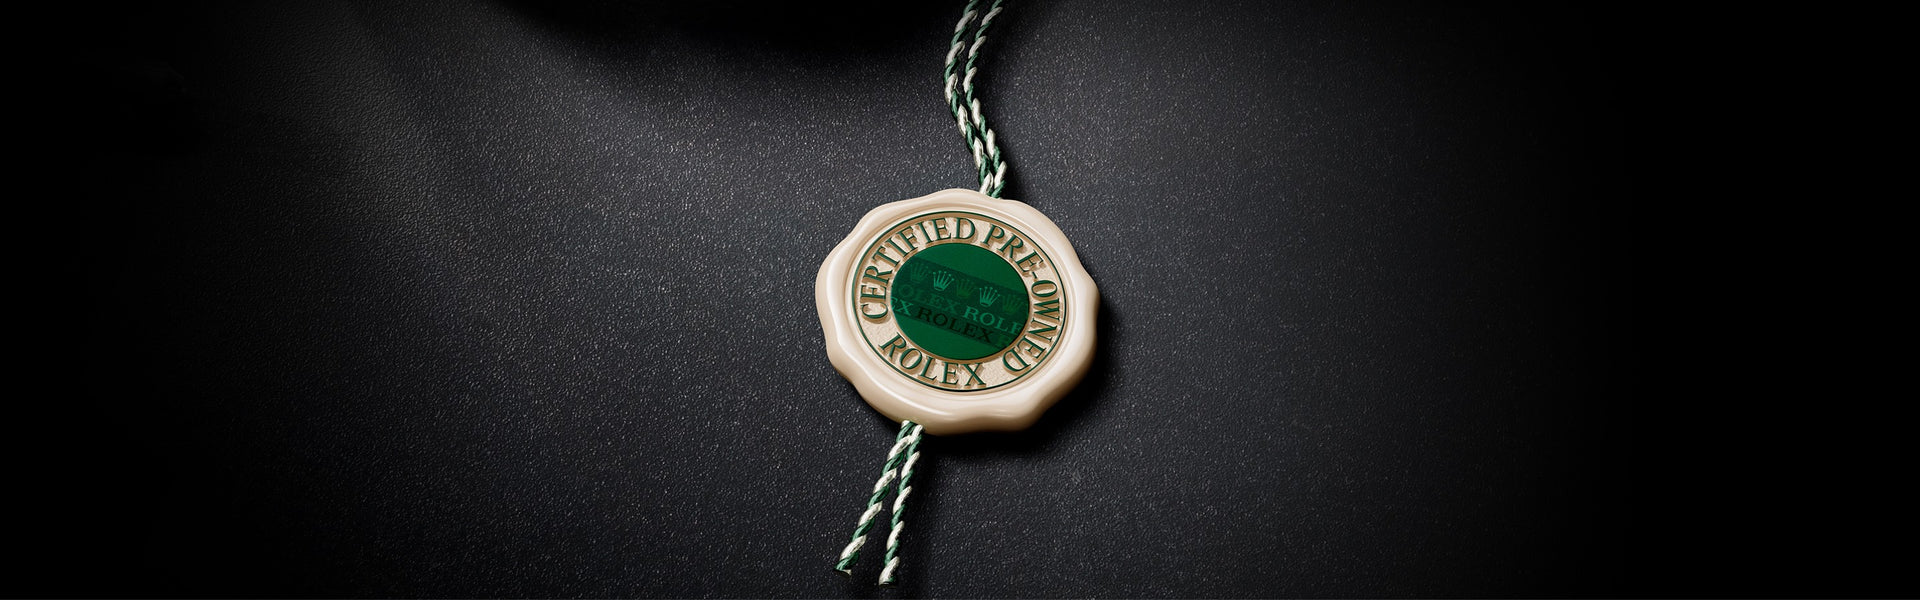 Rolex Certified Pre-Owned Seal on Black Background